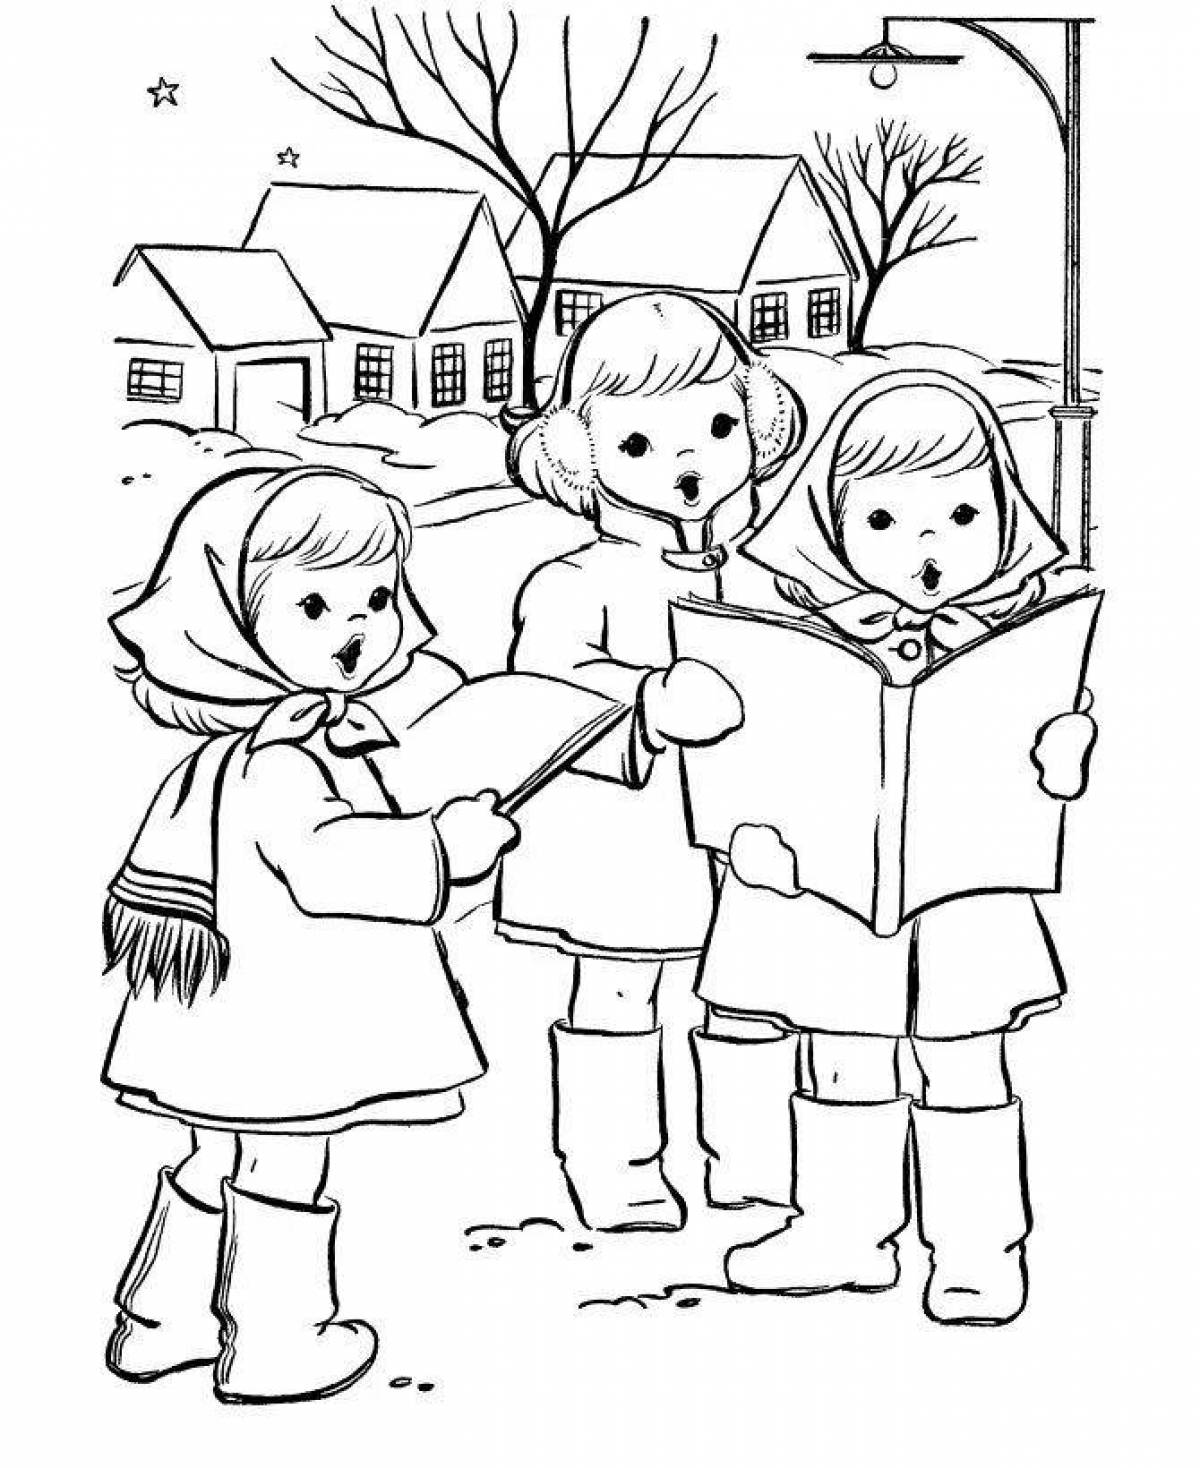 Great Christmas coloring page